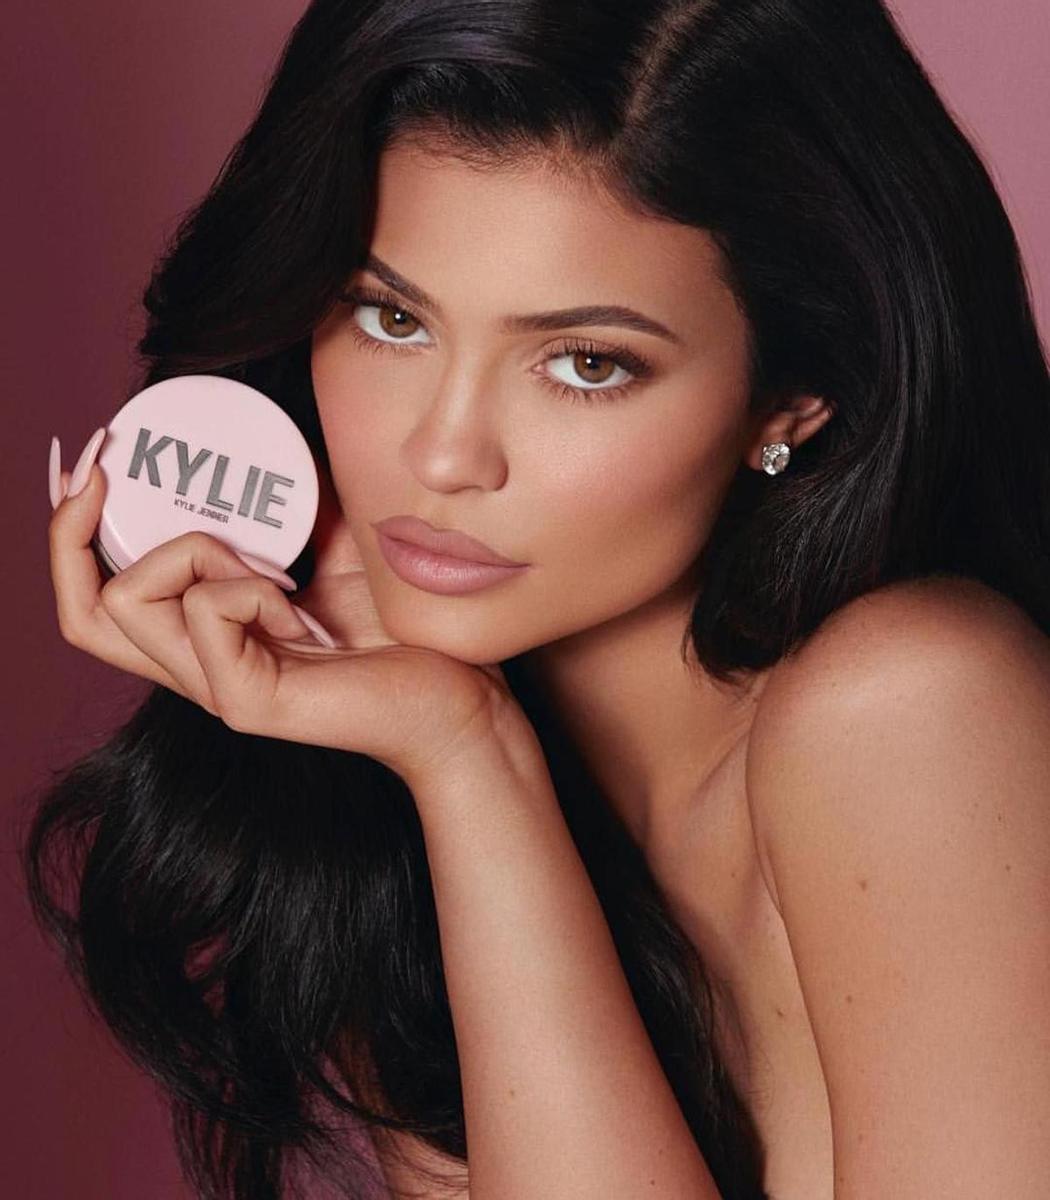 Kylie Jenner con Kylie Cosmetics